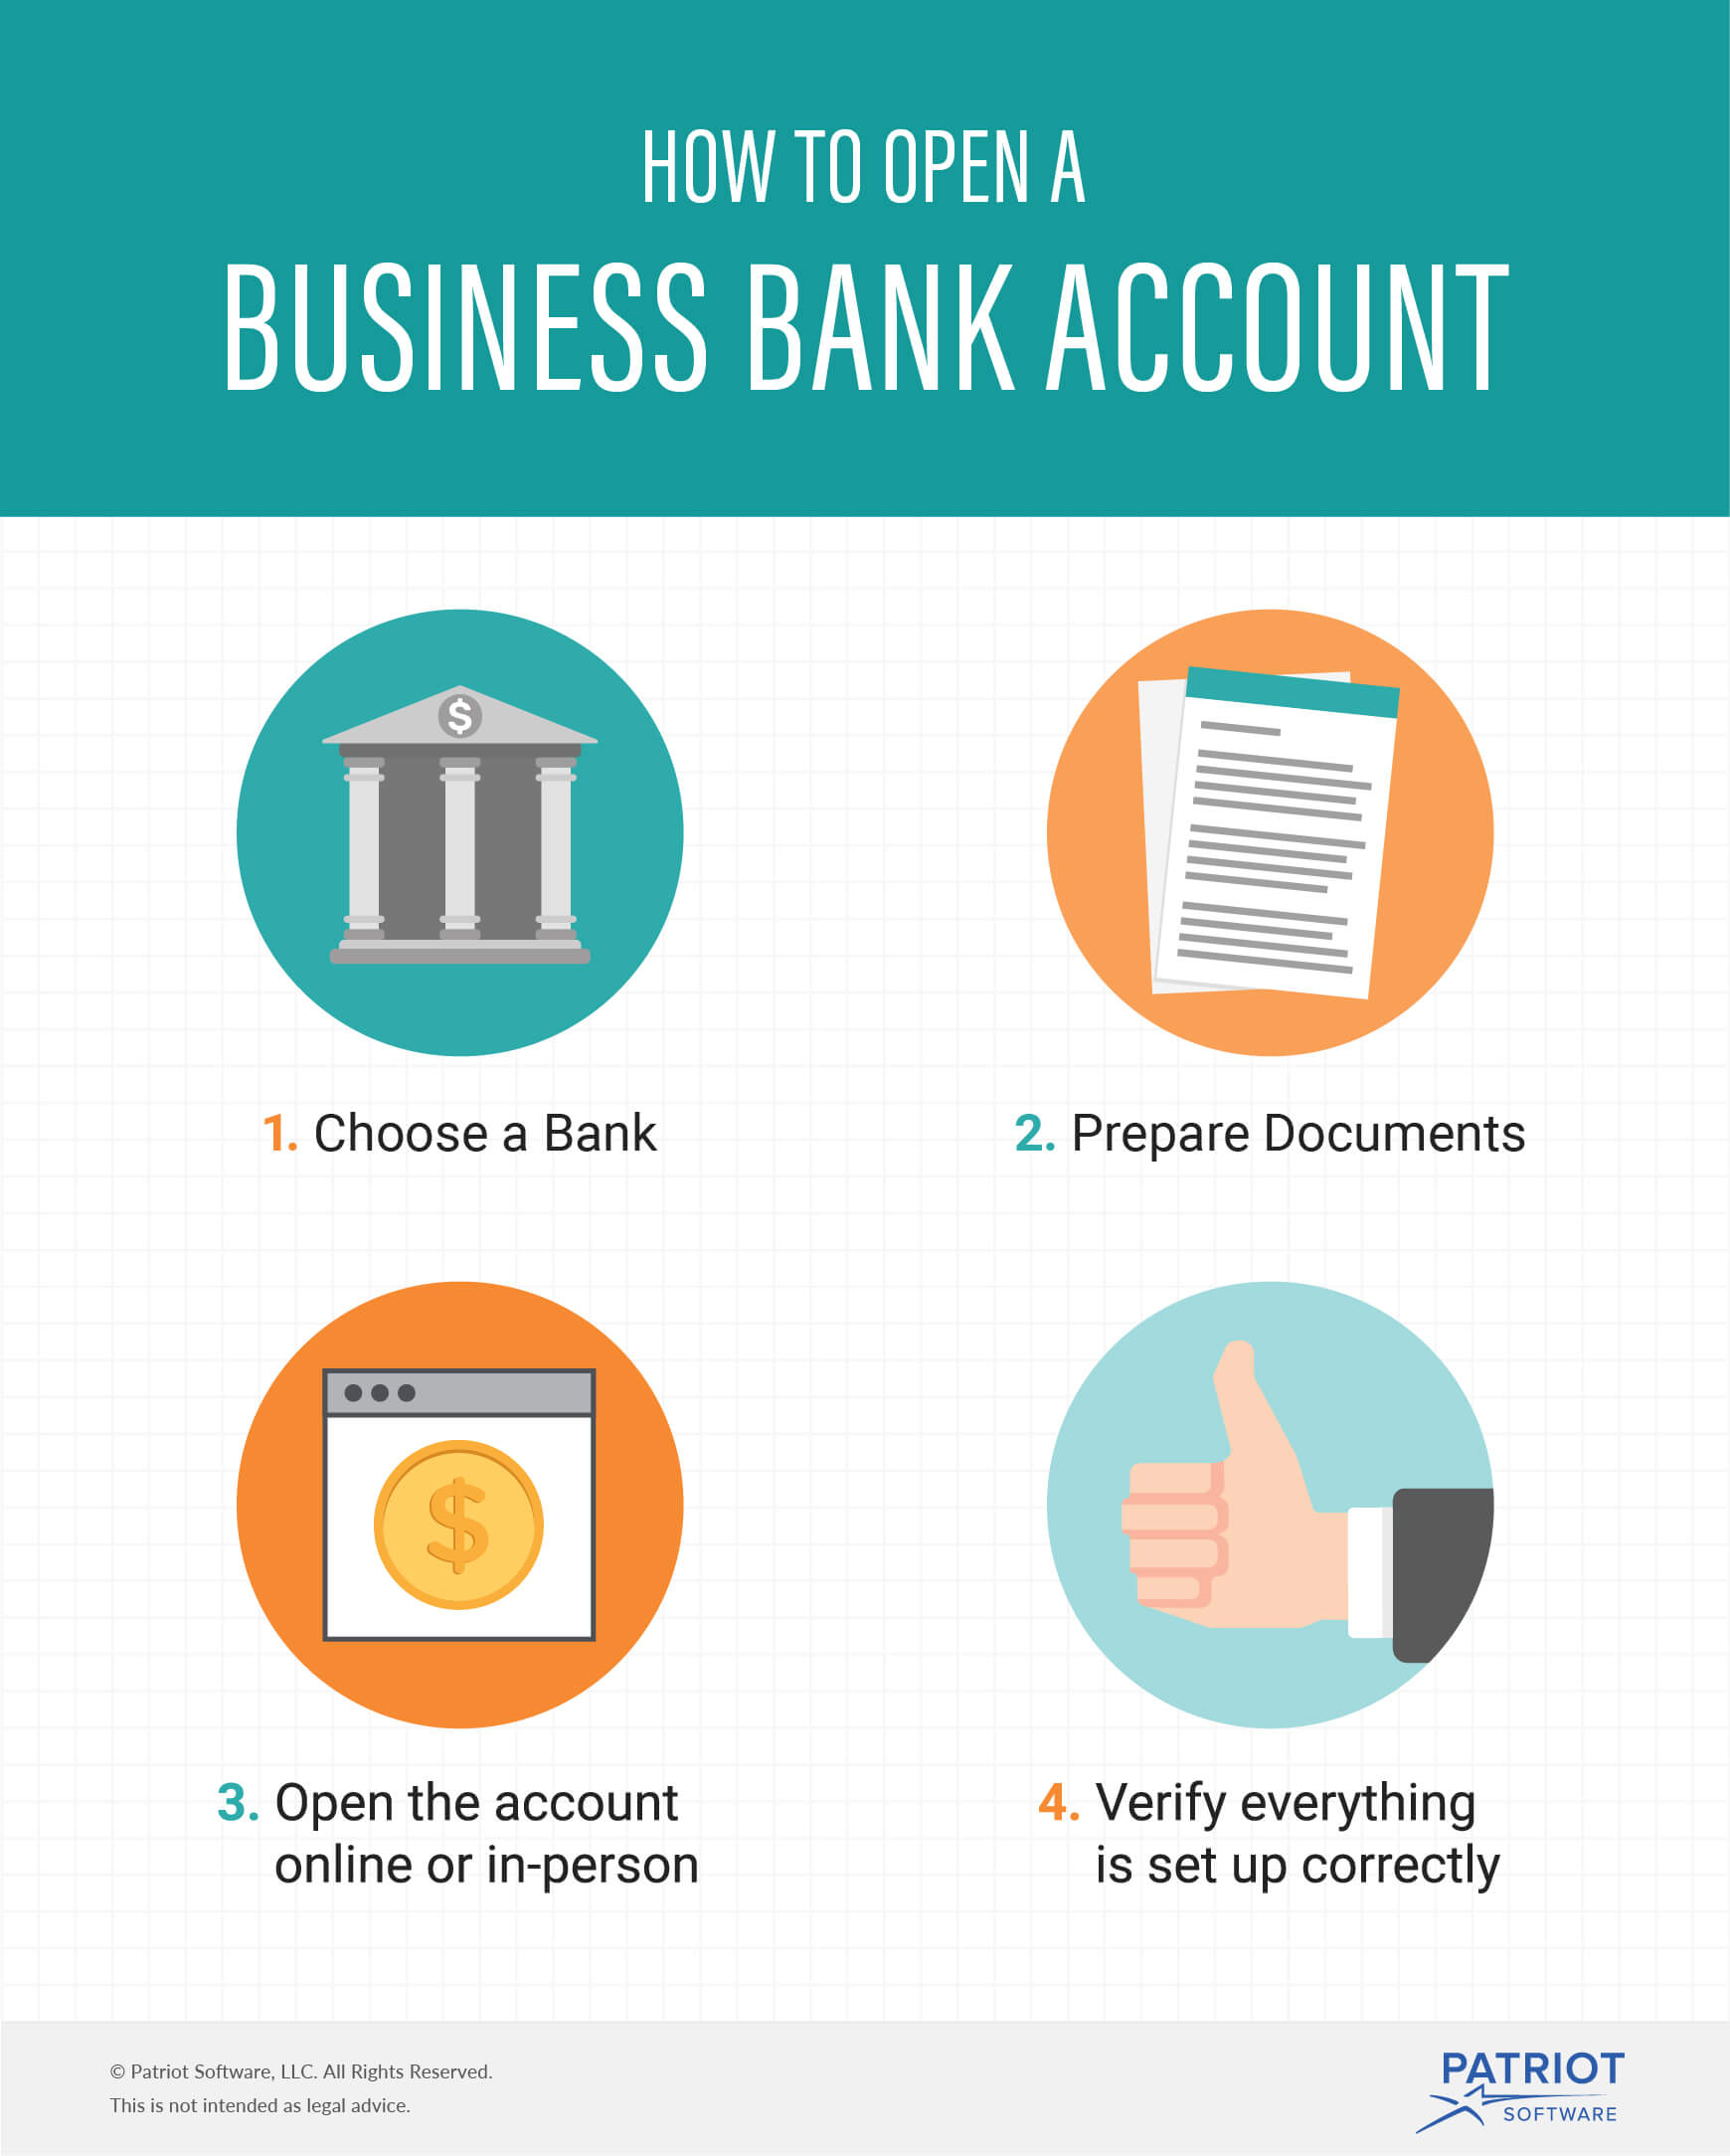 do i need a business plan to open a business bank account